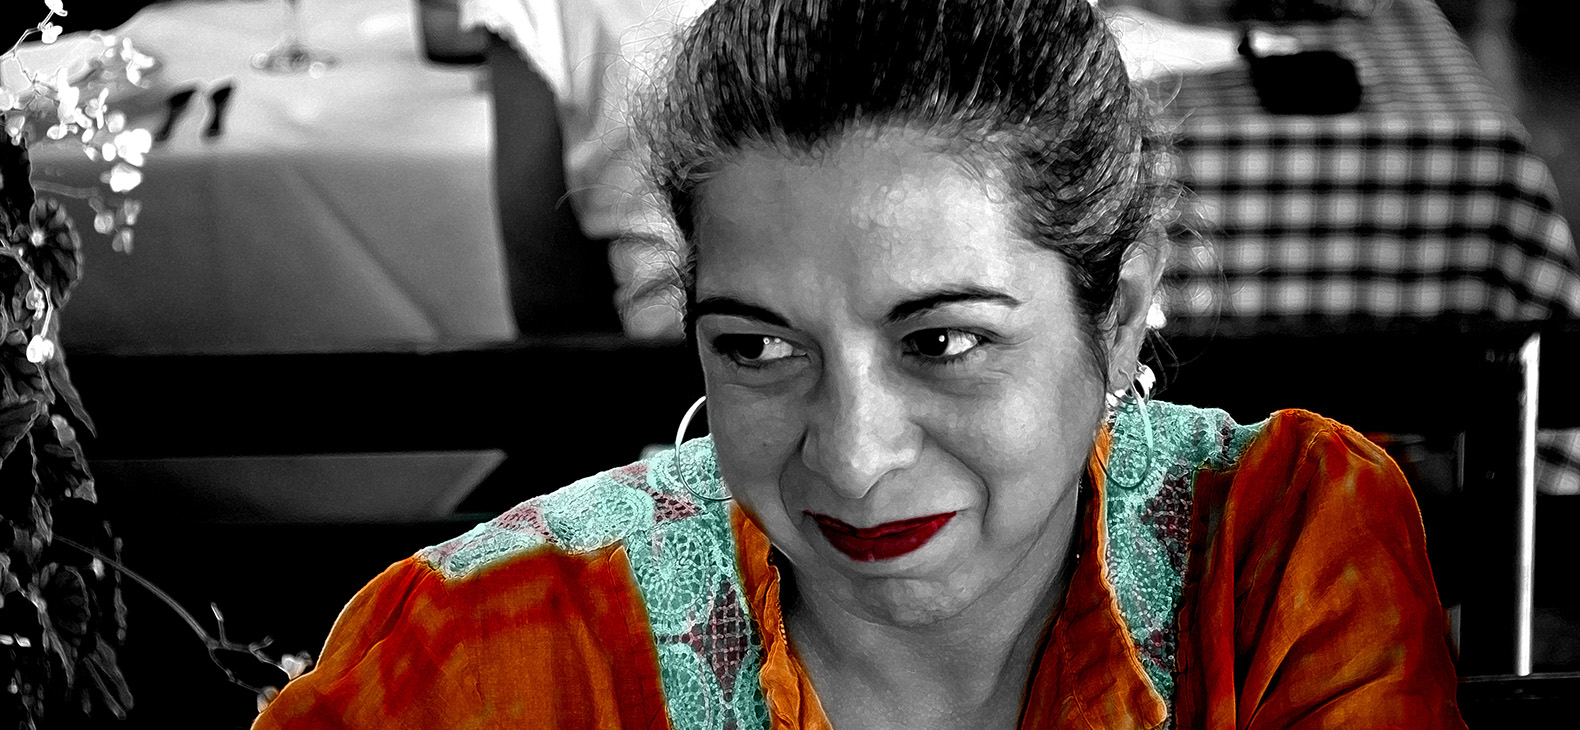 Residency program Schafhof; Artists 2022: Carmen Toscano. Portrait of the Italian artist Carmen Toscano. Color scheme: black and white portrait with red lips, orange and turquoise blouse.